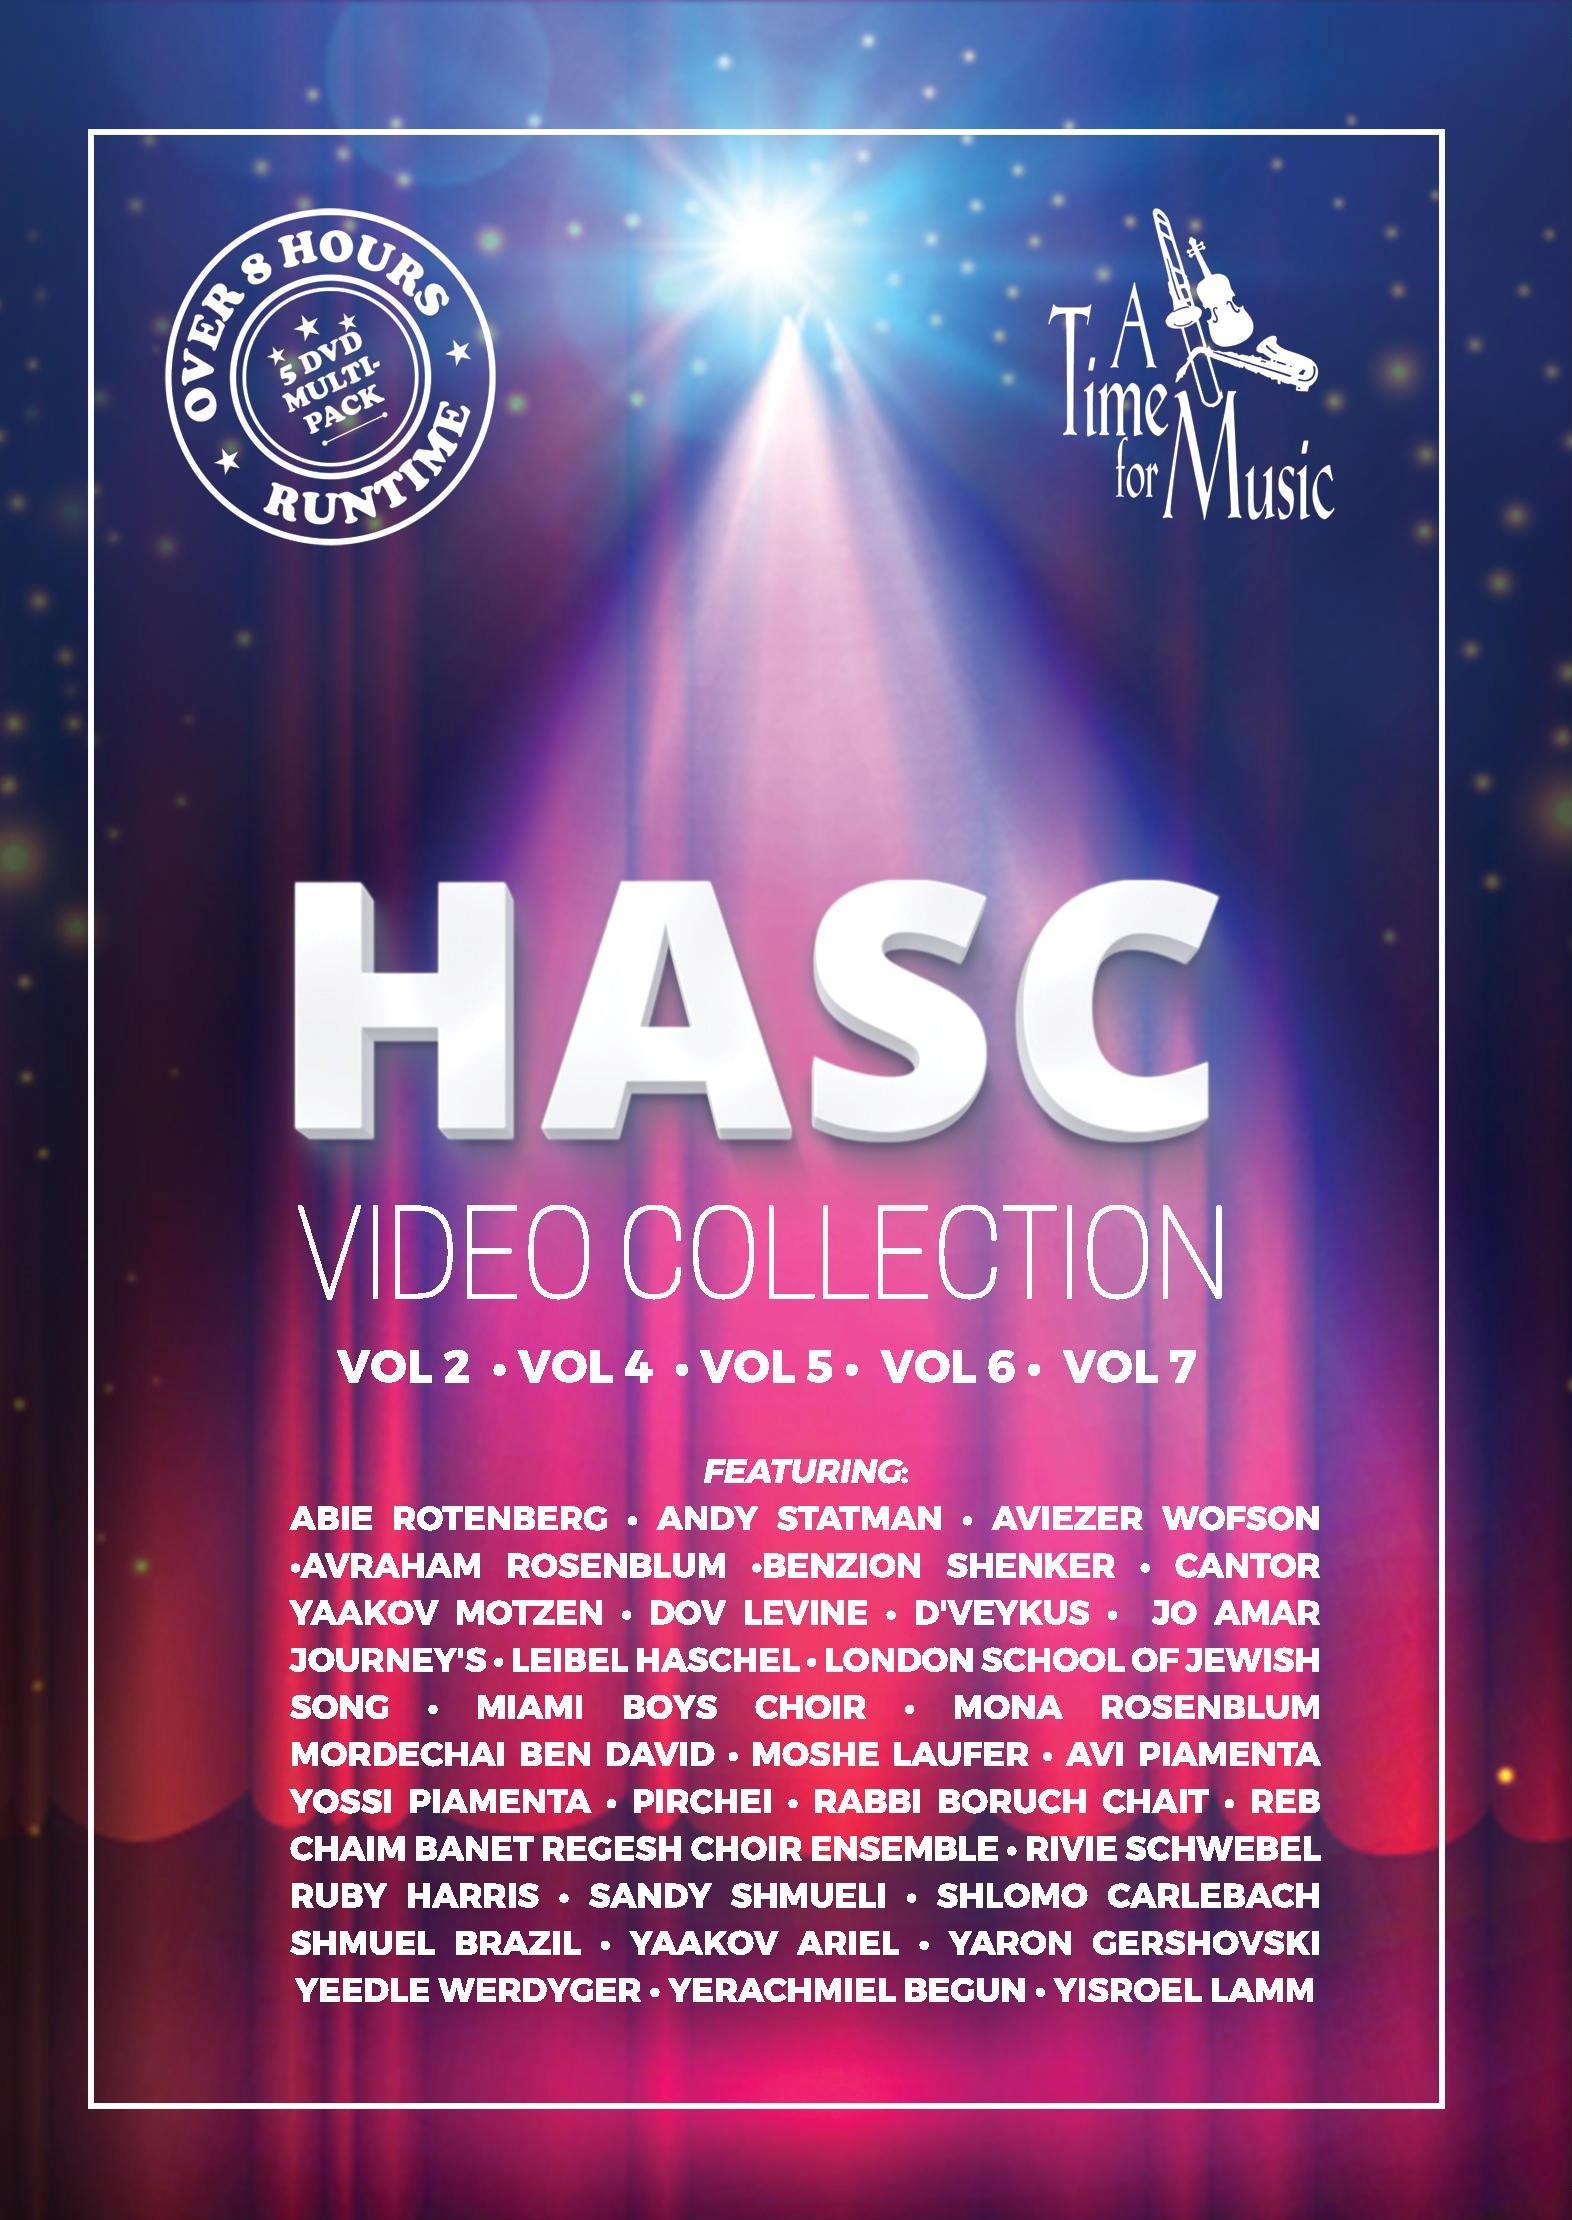 Hasc - The Video Collection - כרכים 2,4,5,6 ו-7